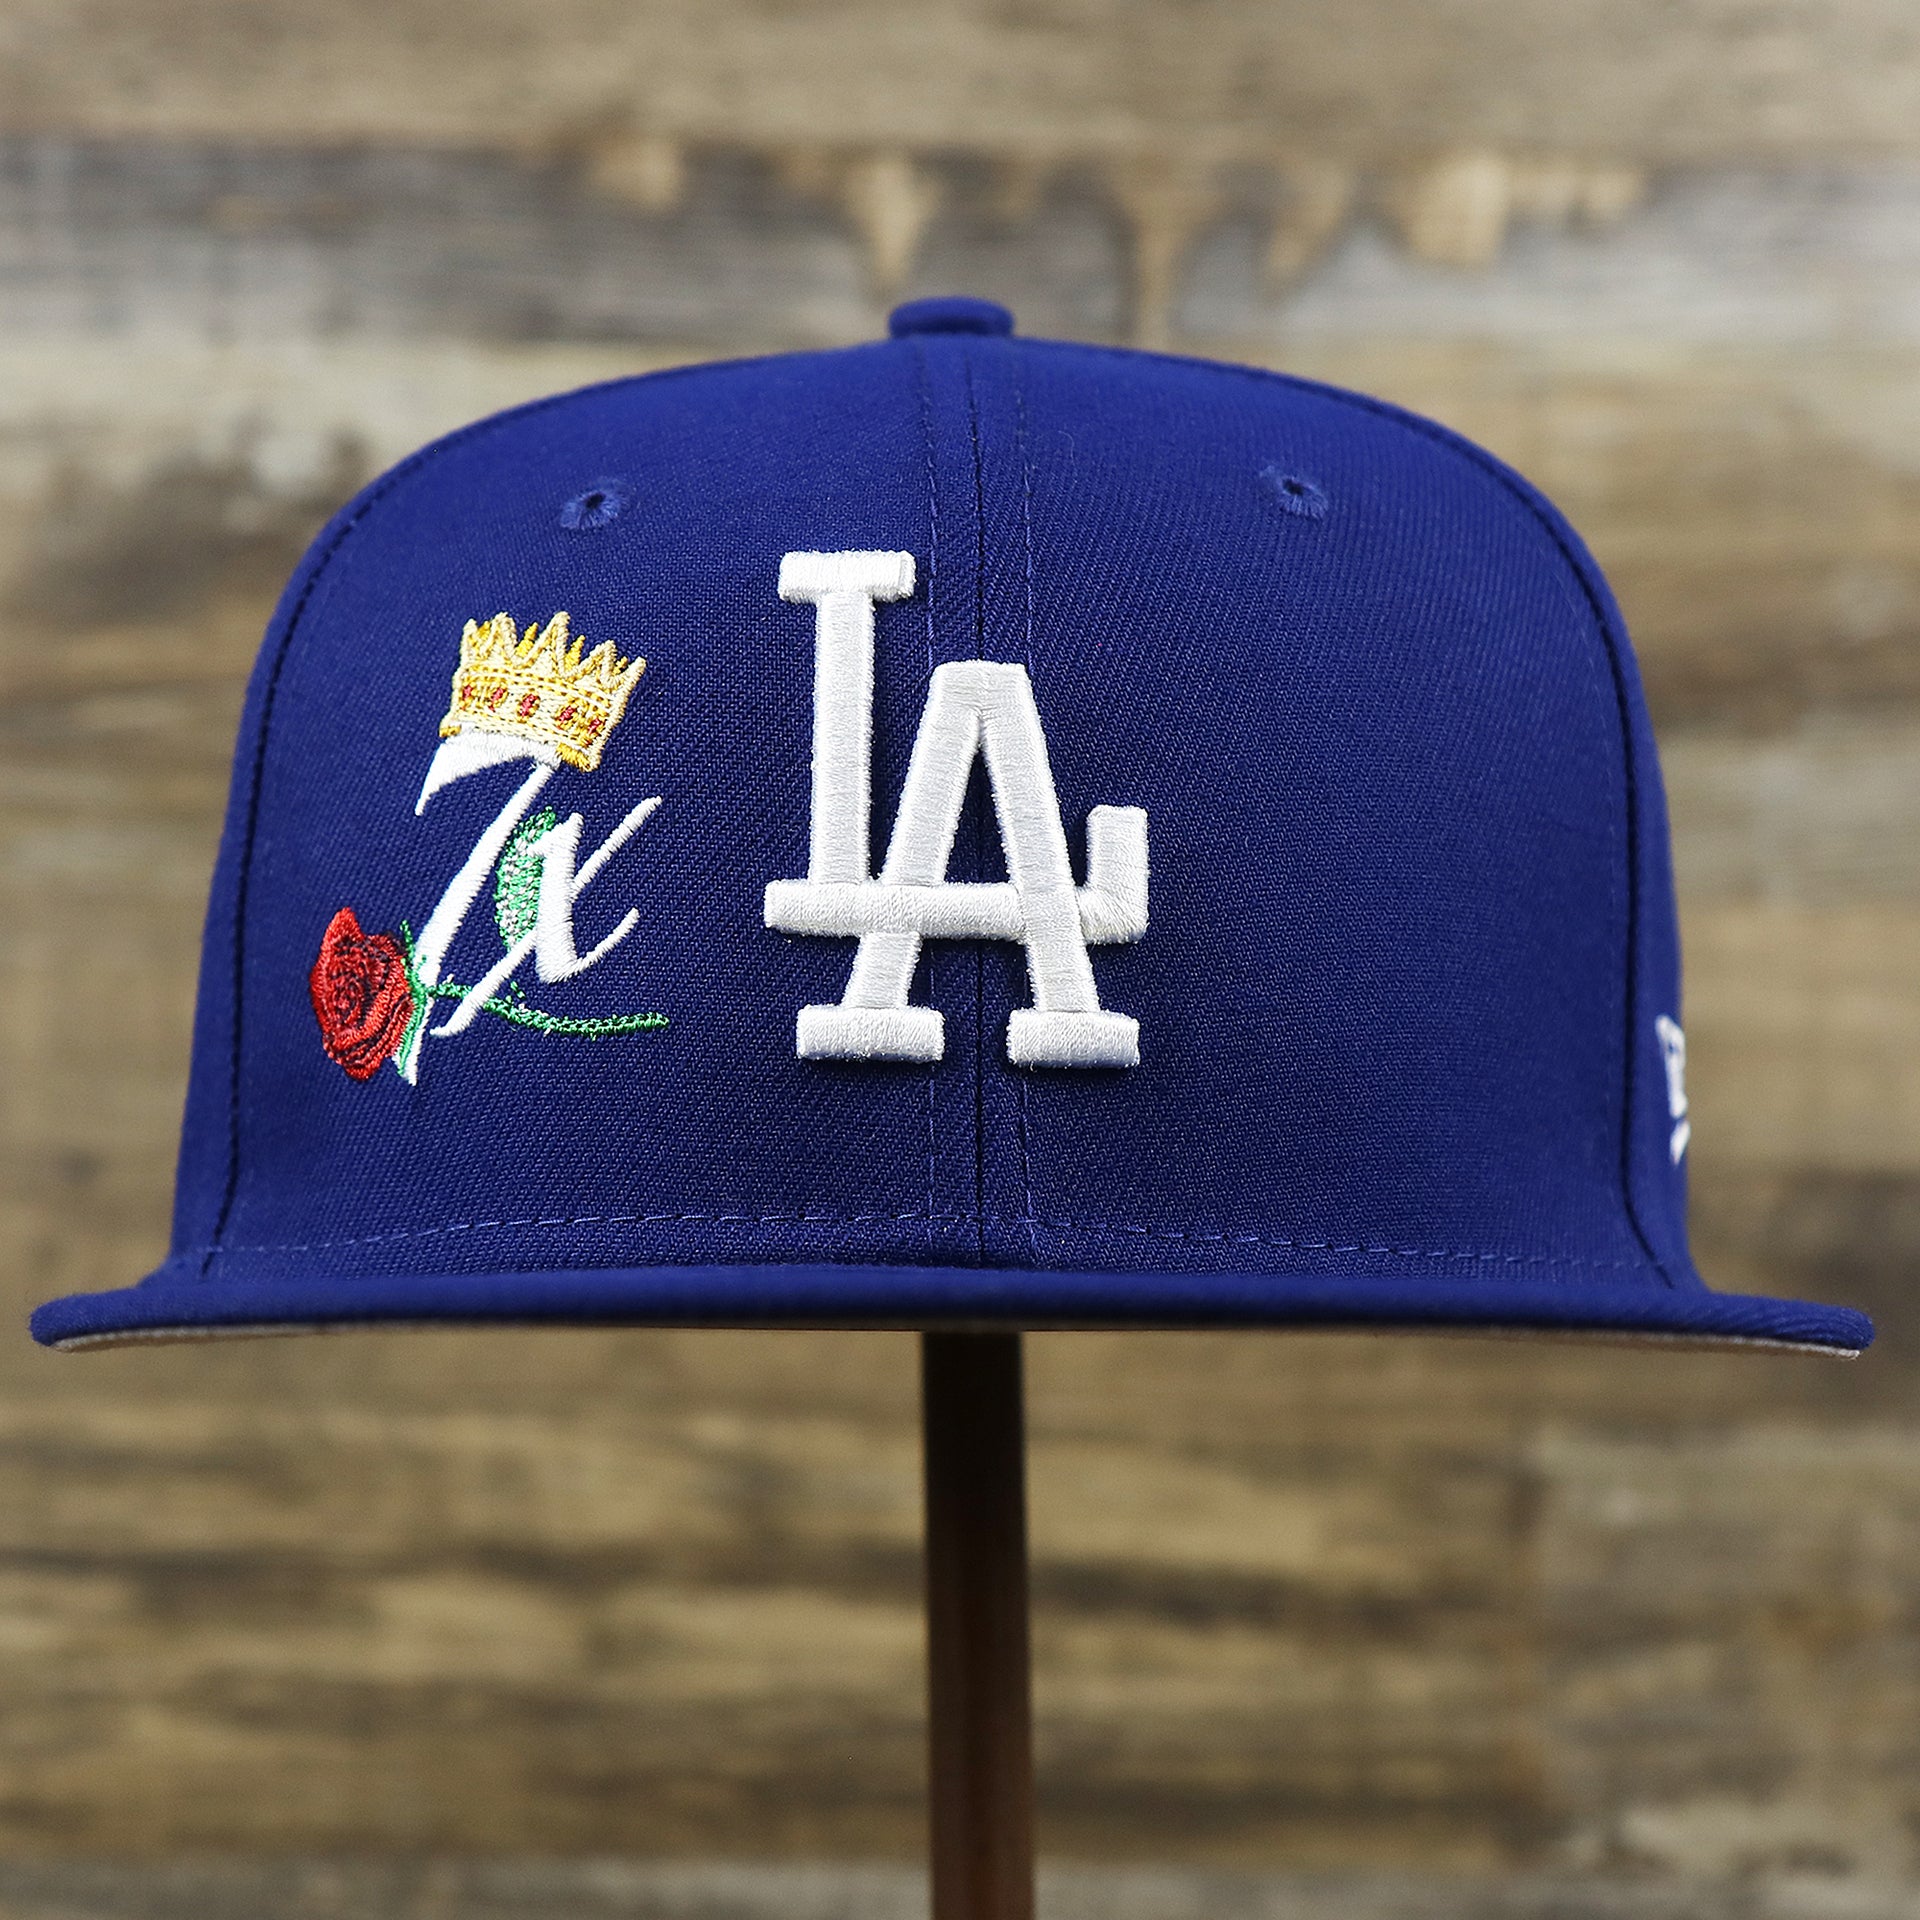 The front of the Los Angeles Dodgers Crown Champions Gray Bottom World Championship Wins Embroidered Fitted Cap | Royal Blue 59Fifty Cap